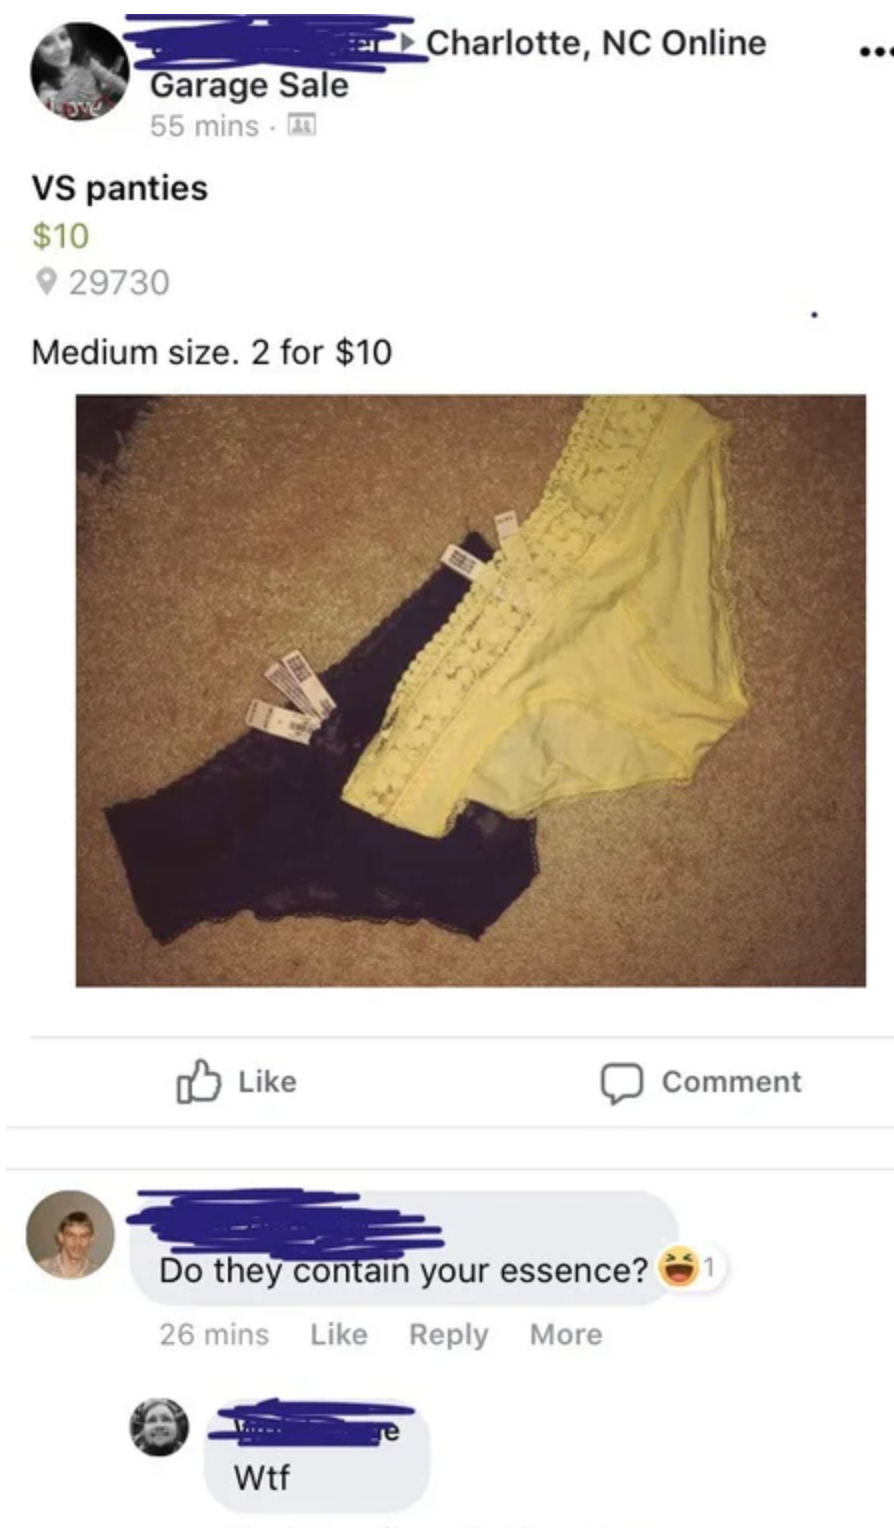 website - Charlotte, Nc Online Garage Sale 55 mins. Vs panties $10 29730 Medium size. 2 for $10 Comment Do they contain your essence? 26 mins More wtf